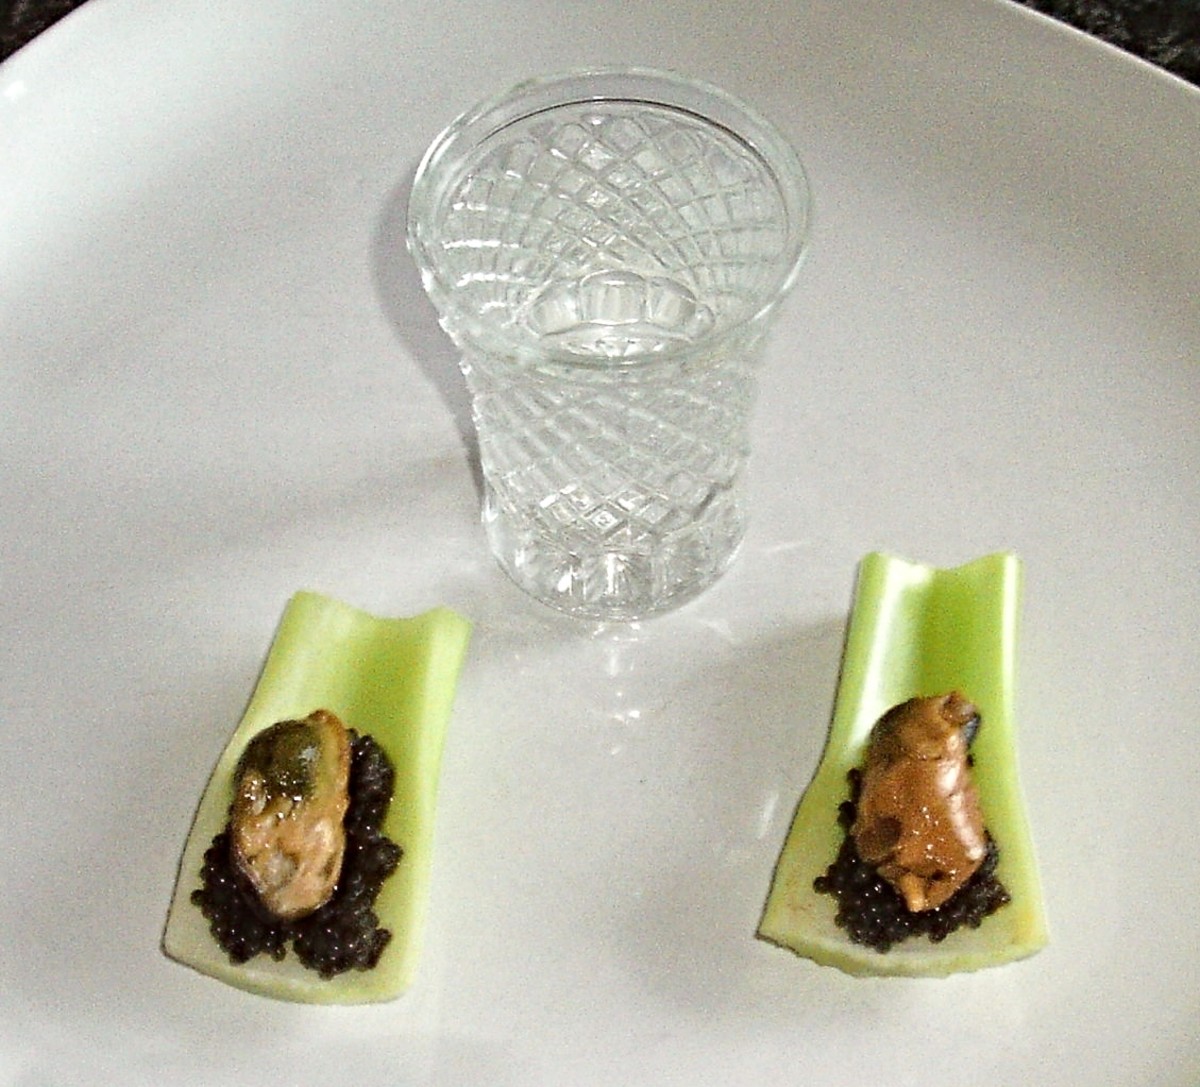 Smoked mussels and caviar are served on celery spoons with a vodka shot.